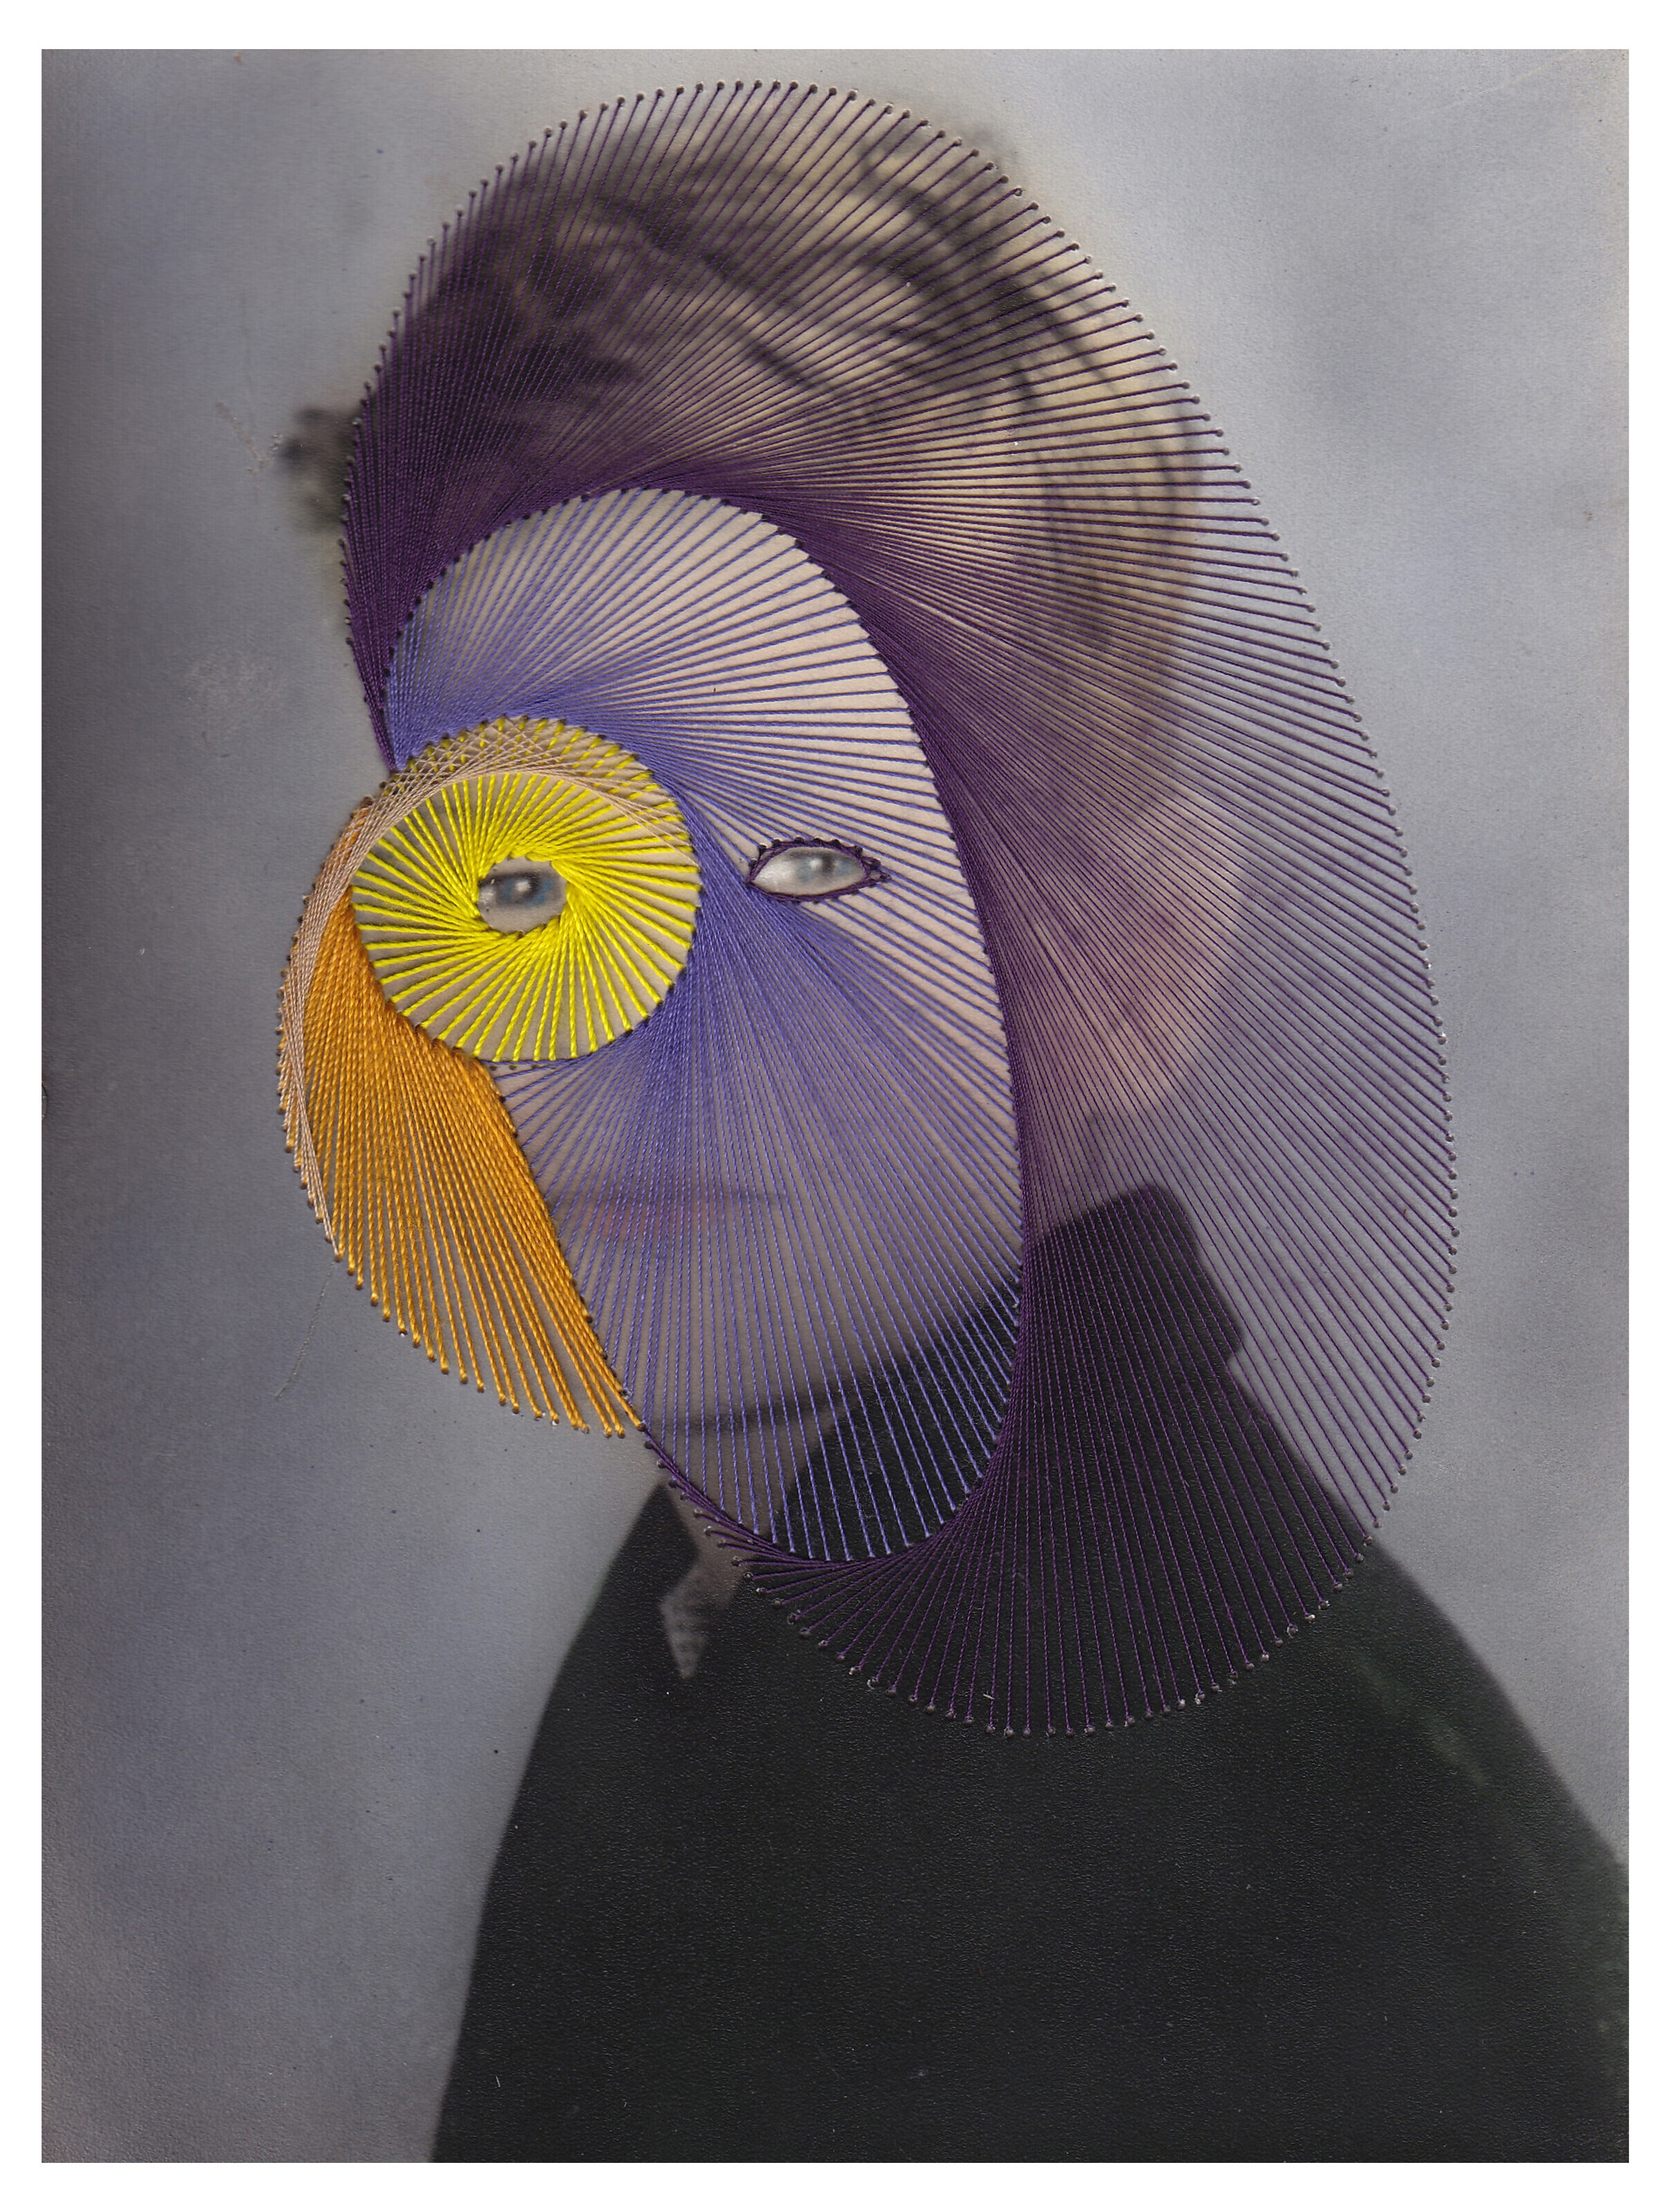 Artwork by Maurizio Anzeri, Giovanni, Made of embroidery on found photograph